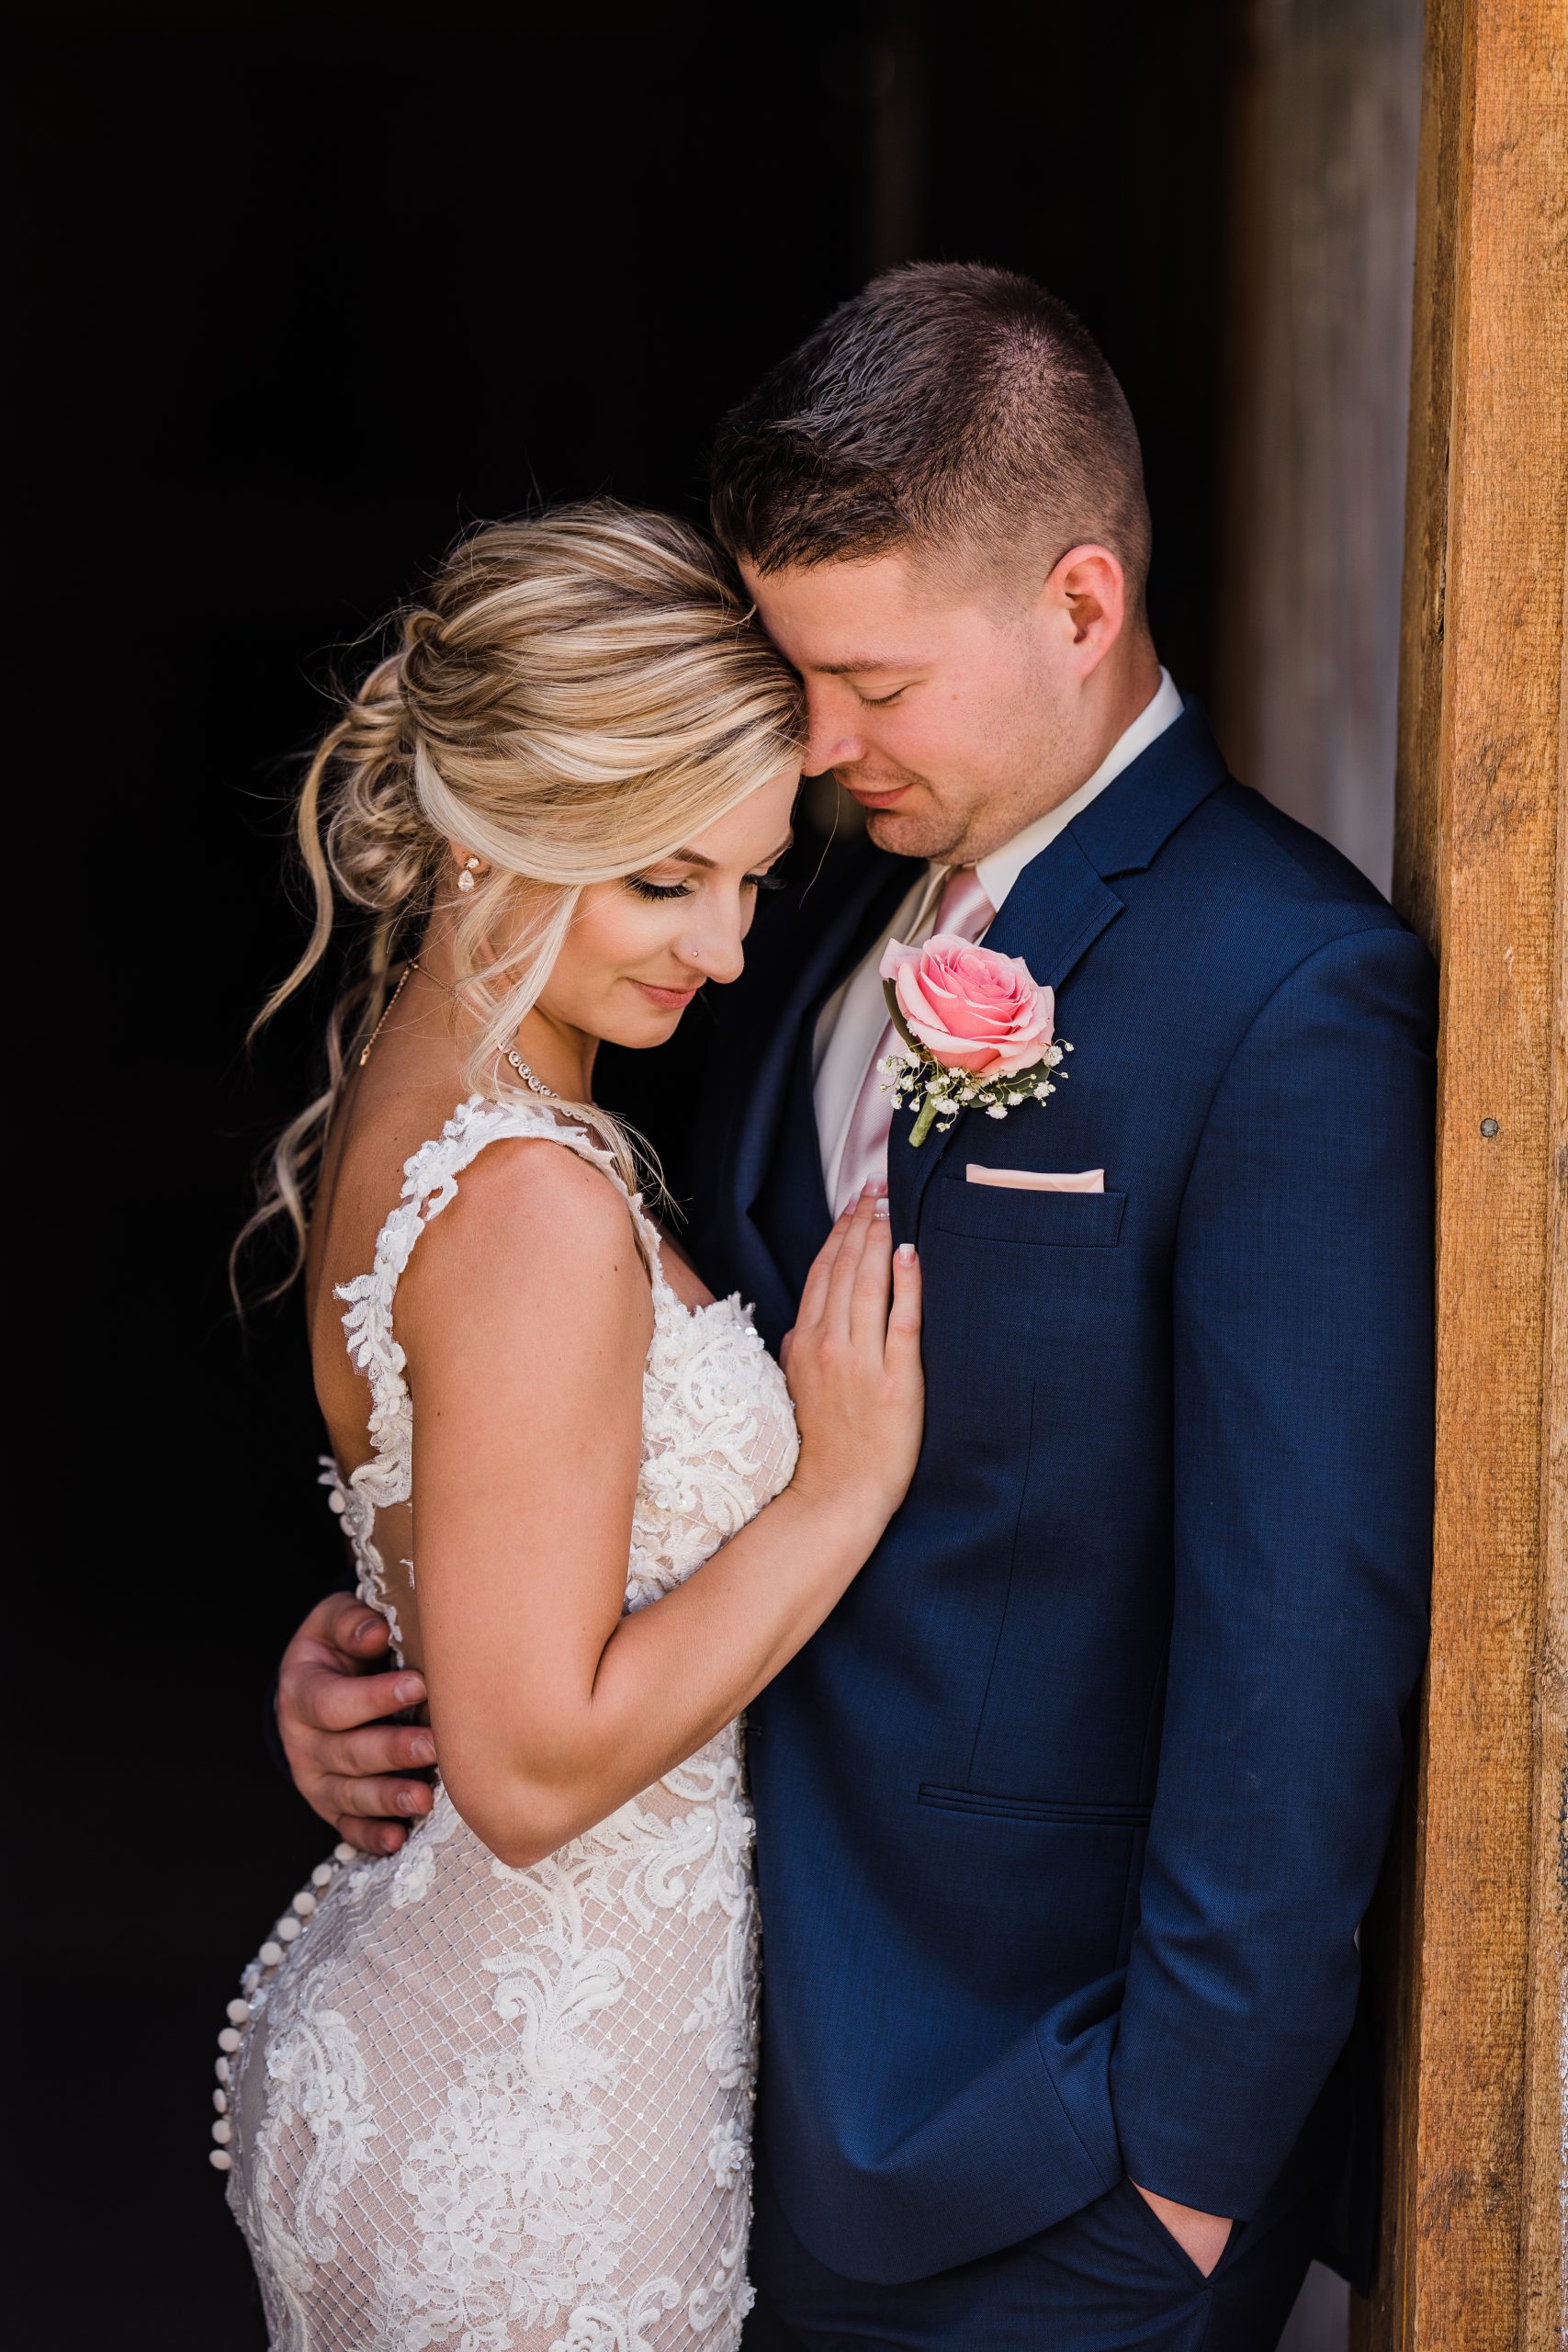 Groom with Real Bride Wearing Lace Wedding Dress Called Abbie by Maggie Sottero